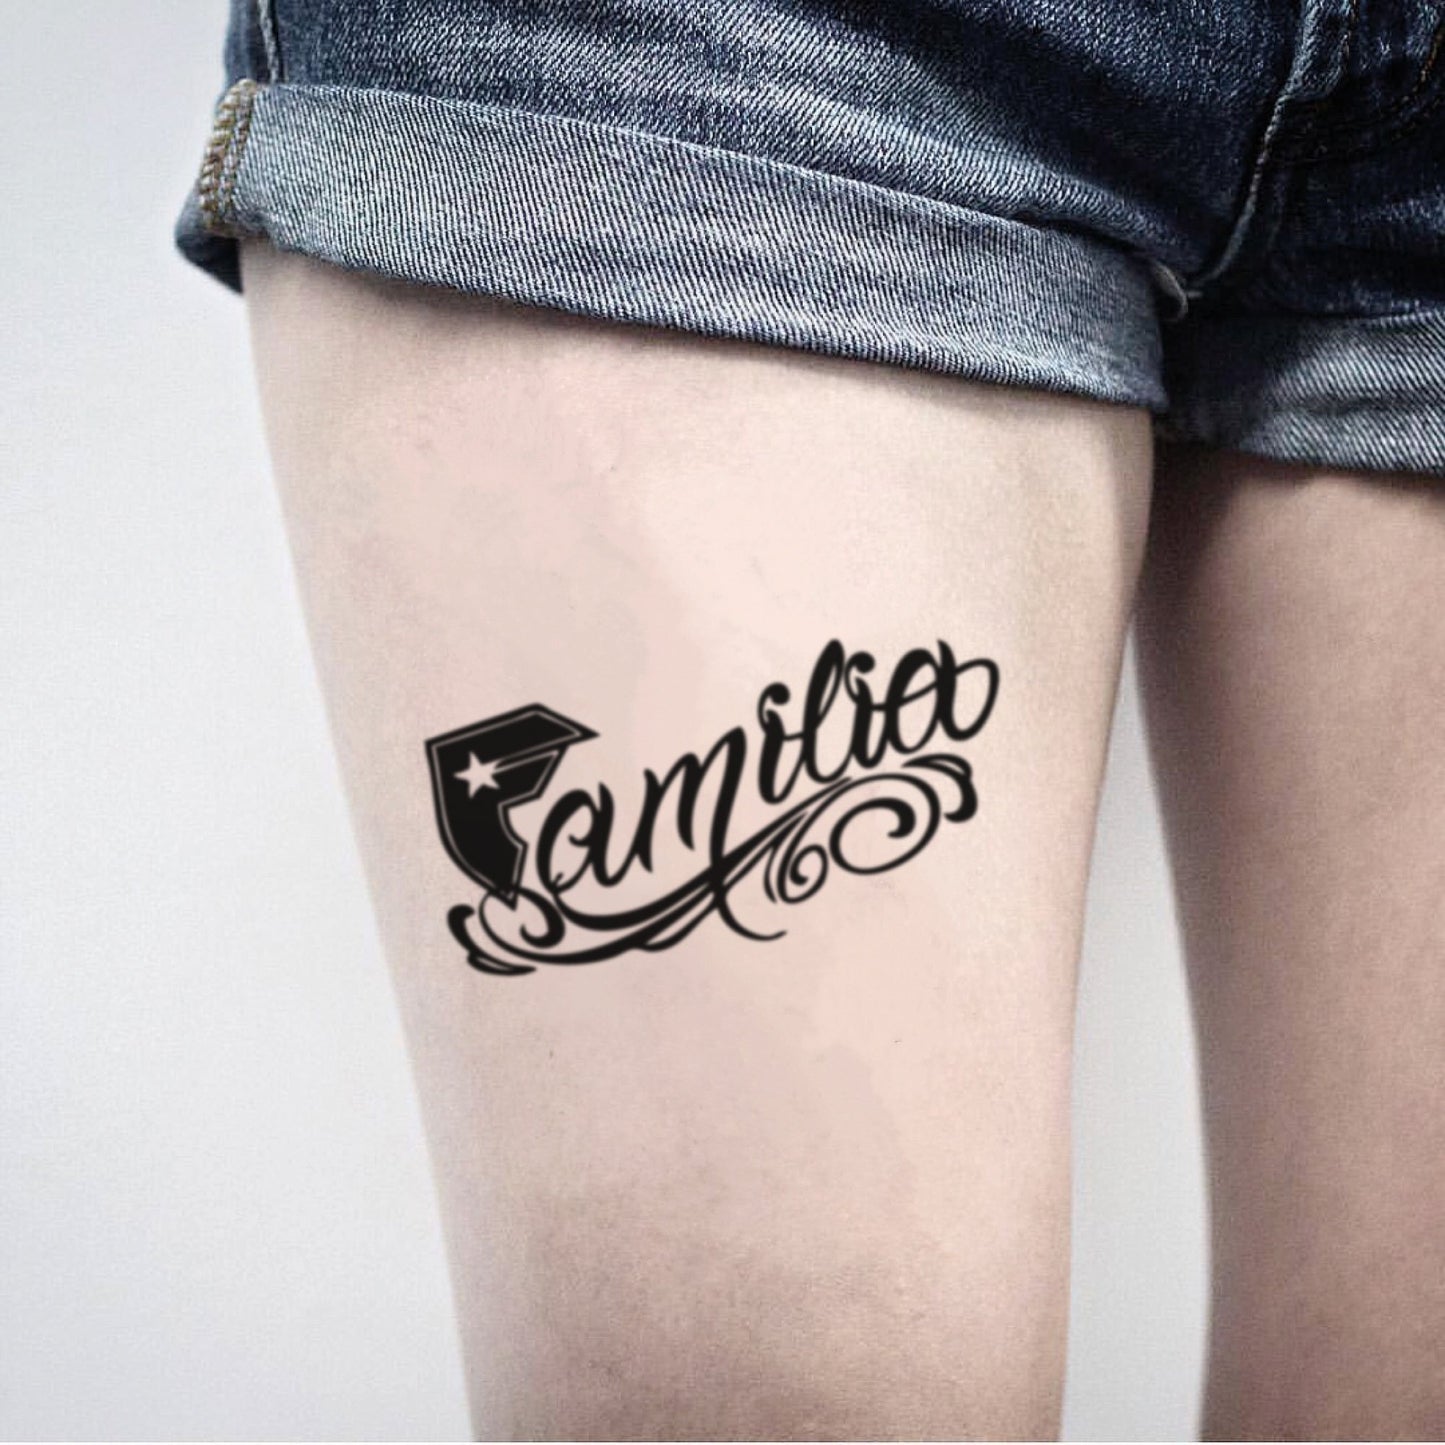 fake medium famous stars and straps lettering temporary tattoo sticker design idea on thigh